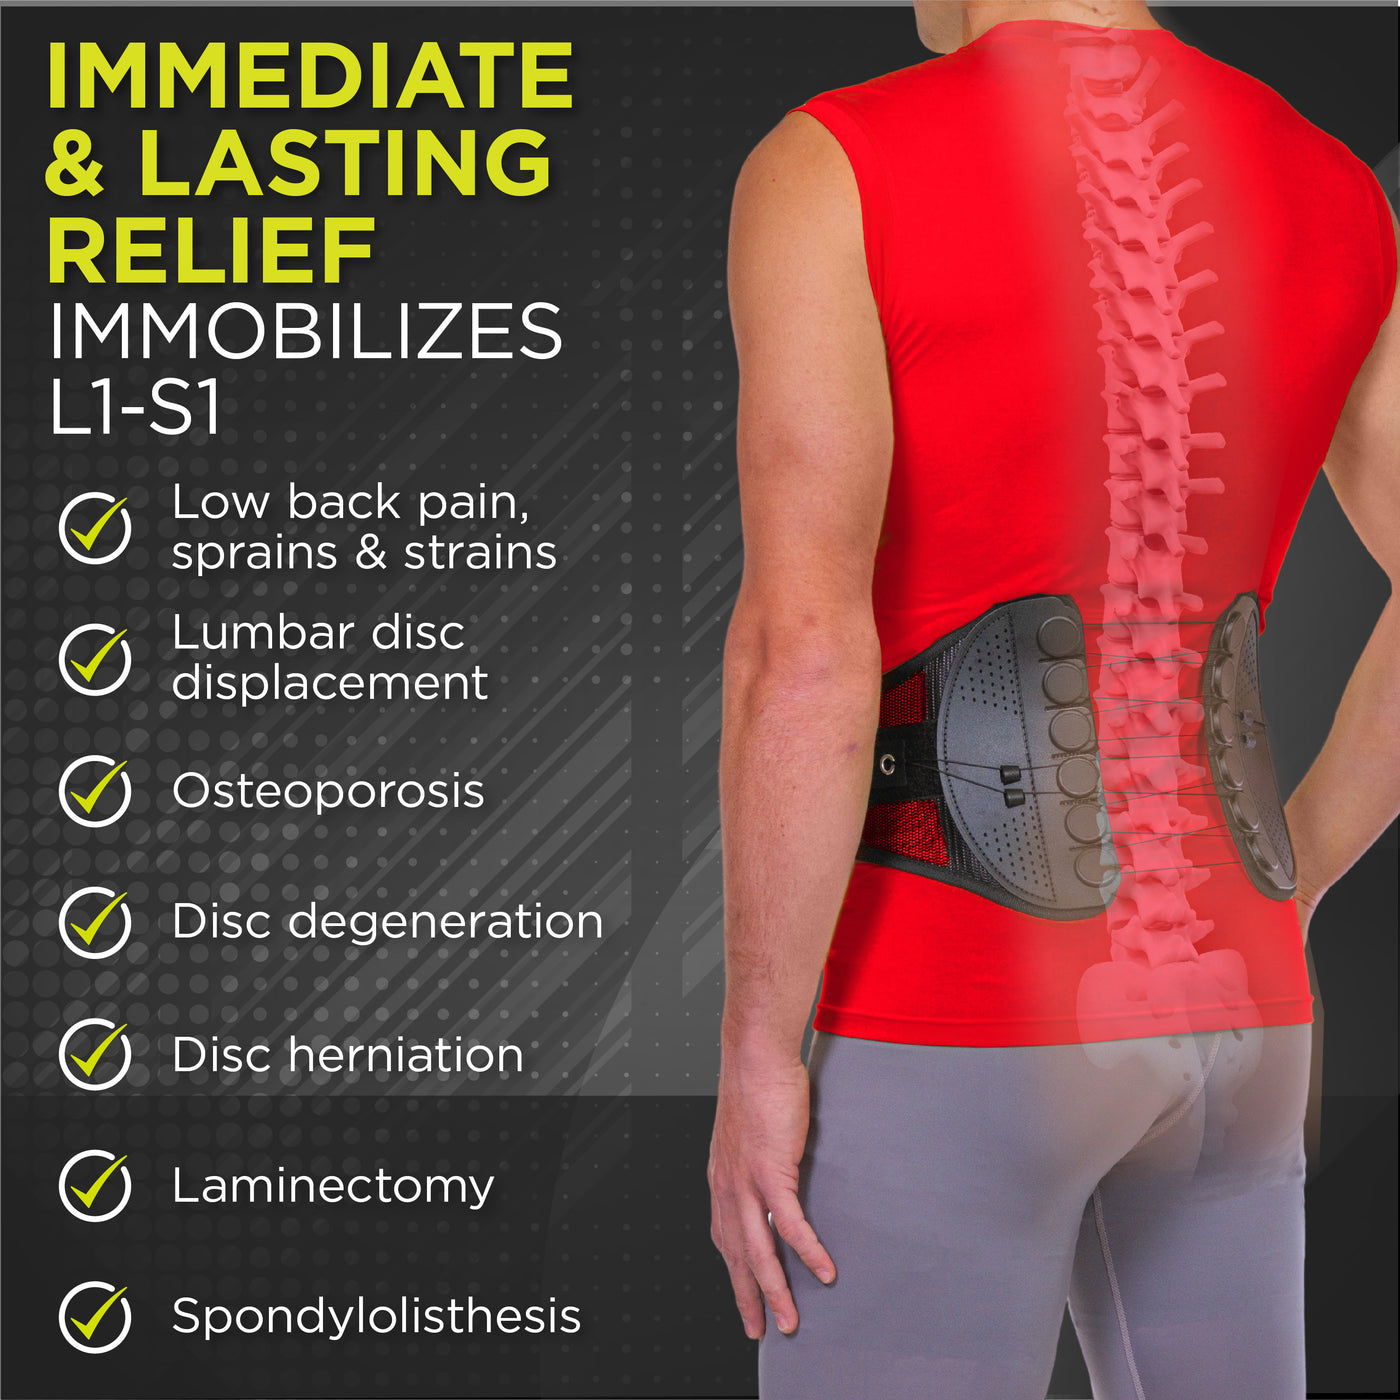 Treats spinal stenosis, spondylolisthesis, general back pain, lumbar sprain, compression fractures, degenerative disc disease and more